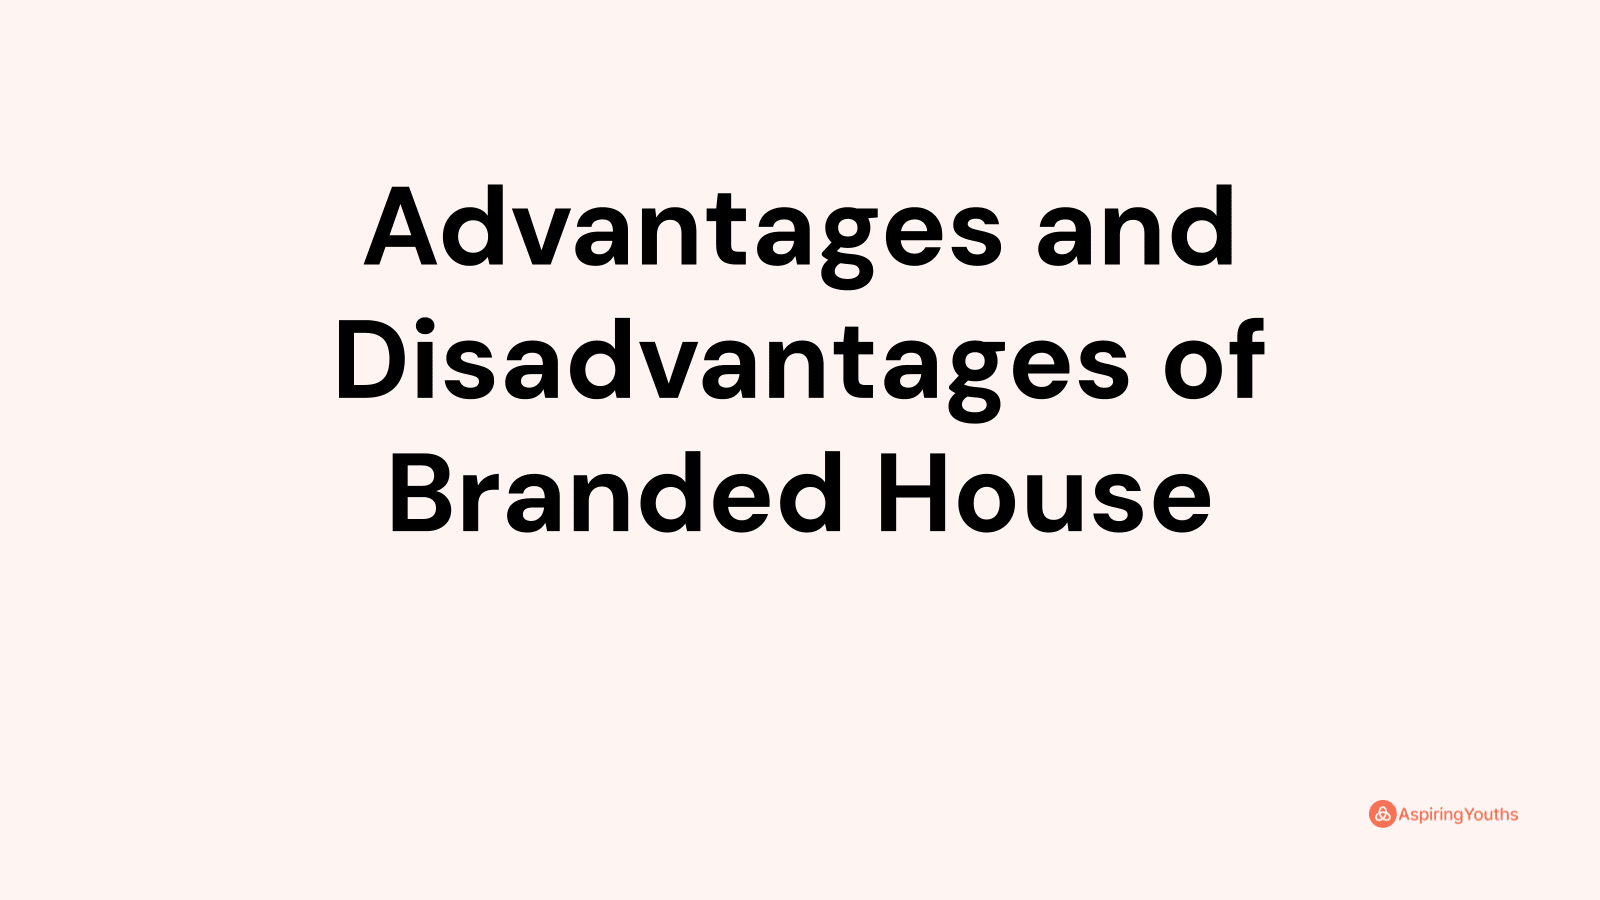 Advantages and disadvantages of Branded House